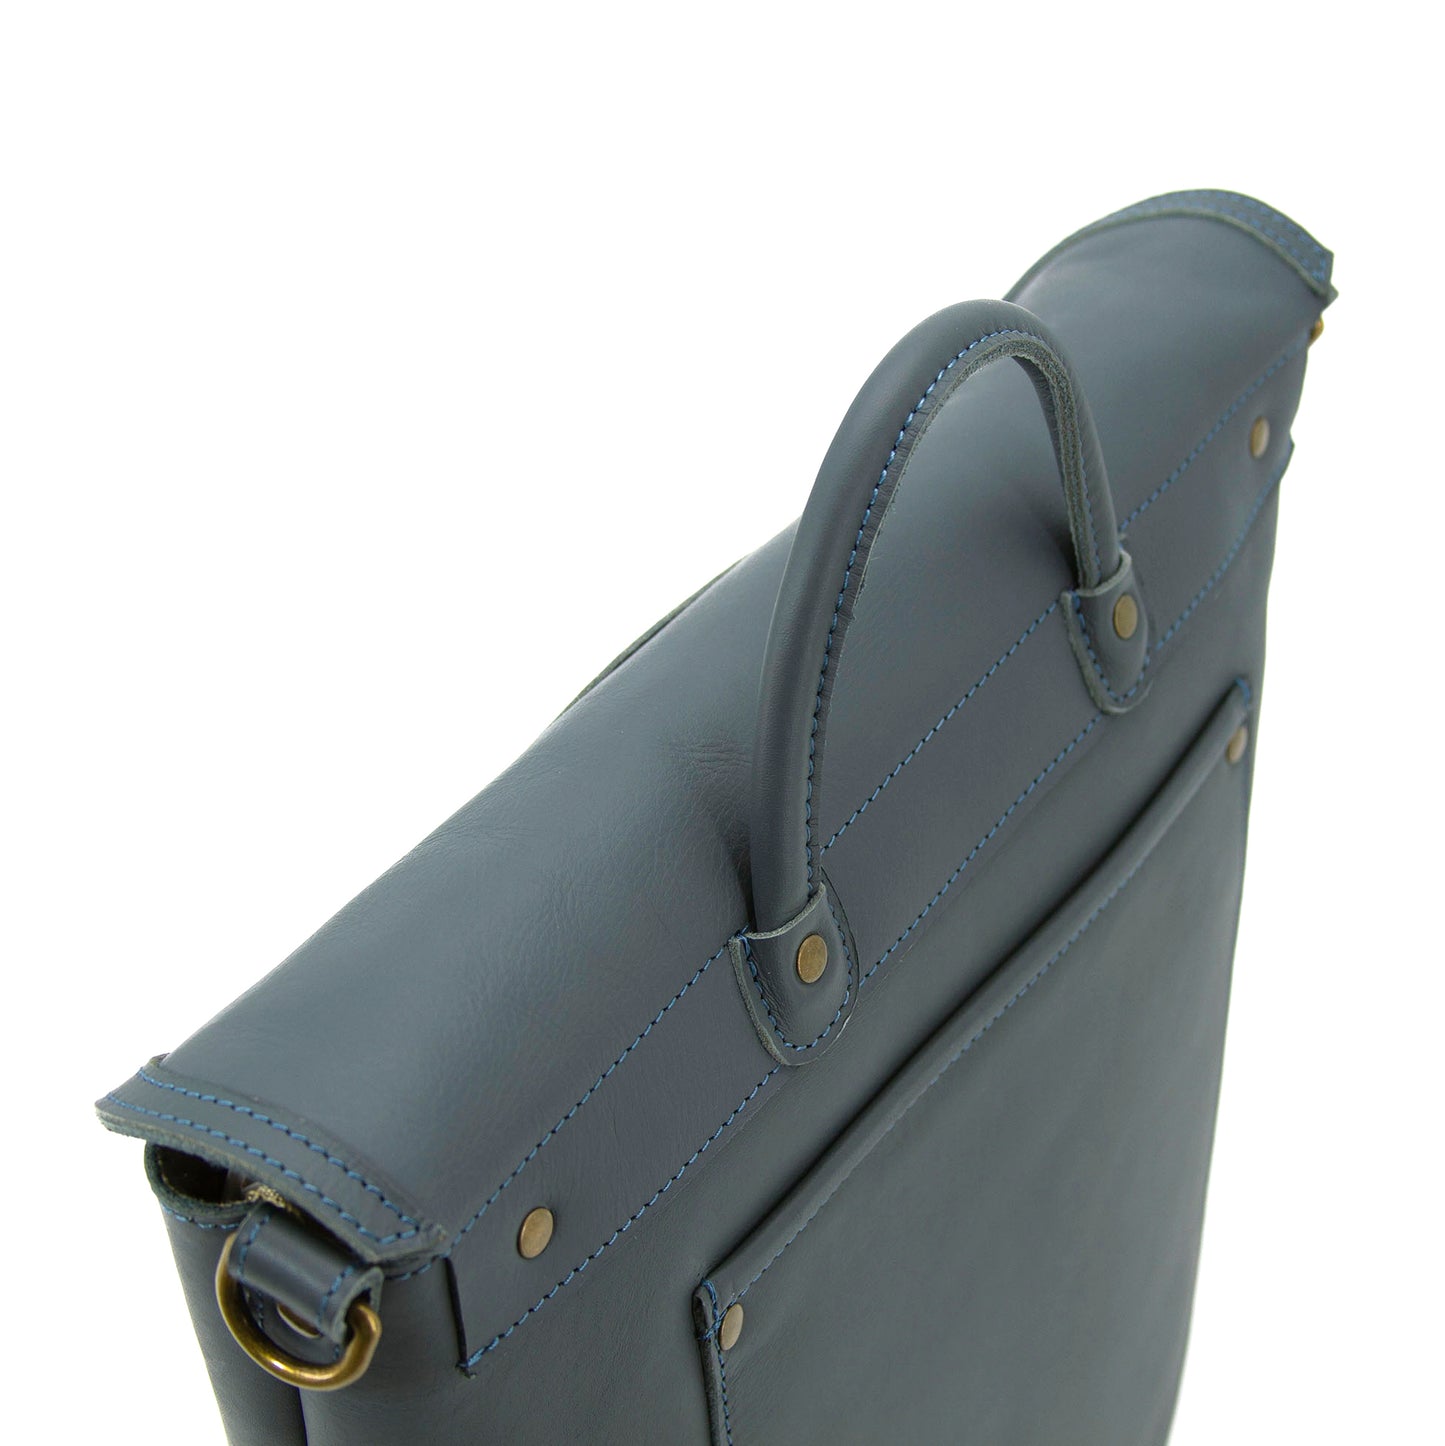 High Quality Trapezoidal Flap Leather Bag-i7bags